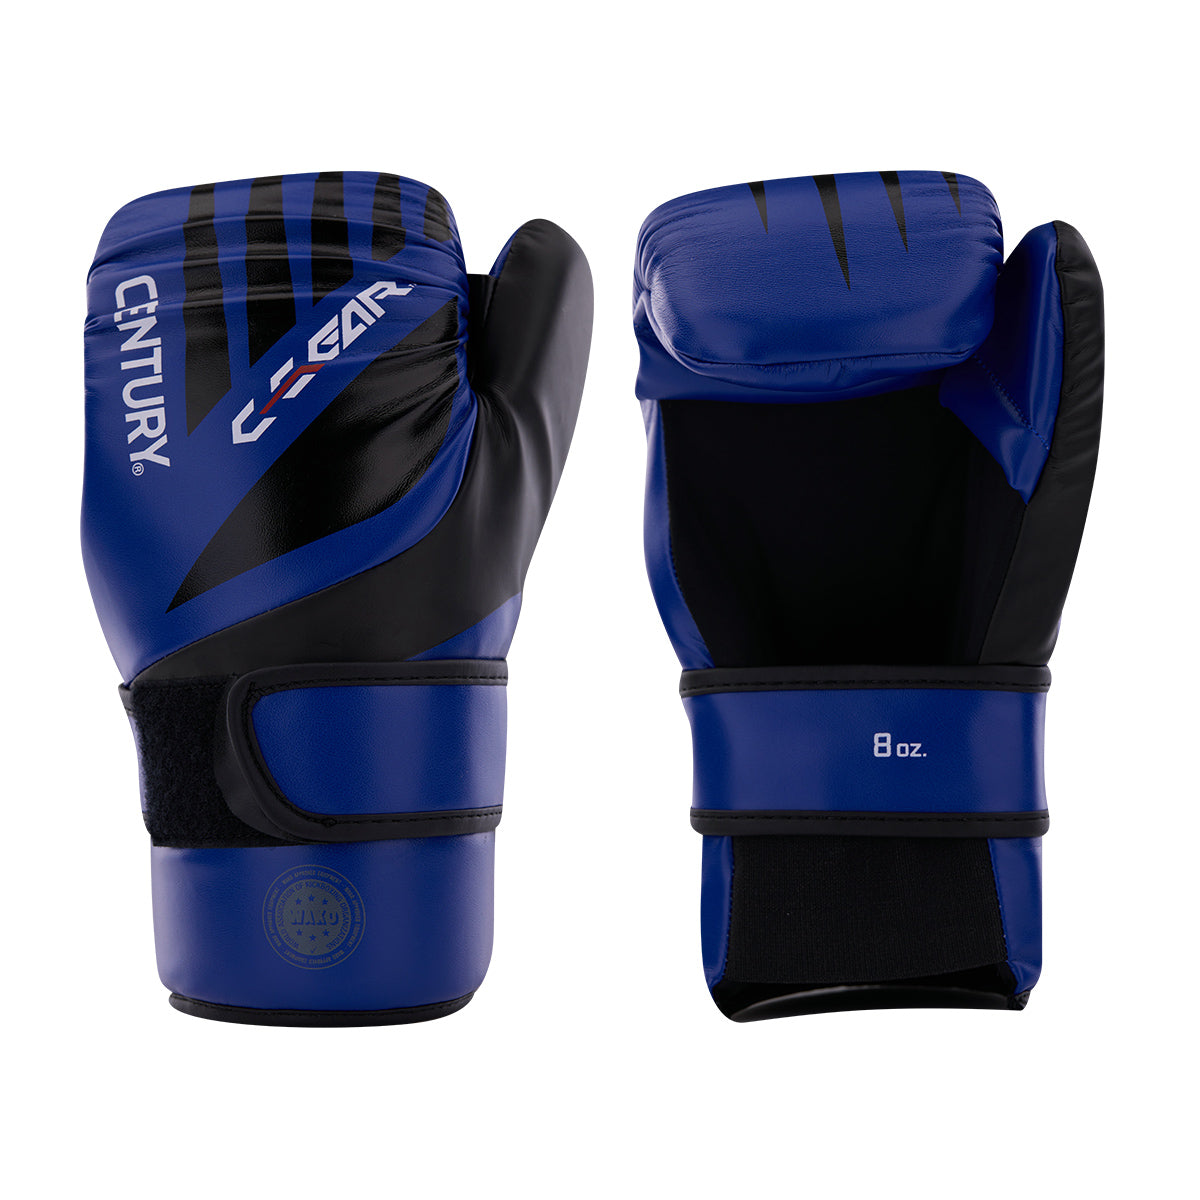 C-Gear Integrity Point Fighting Punches Blue Black